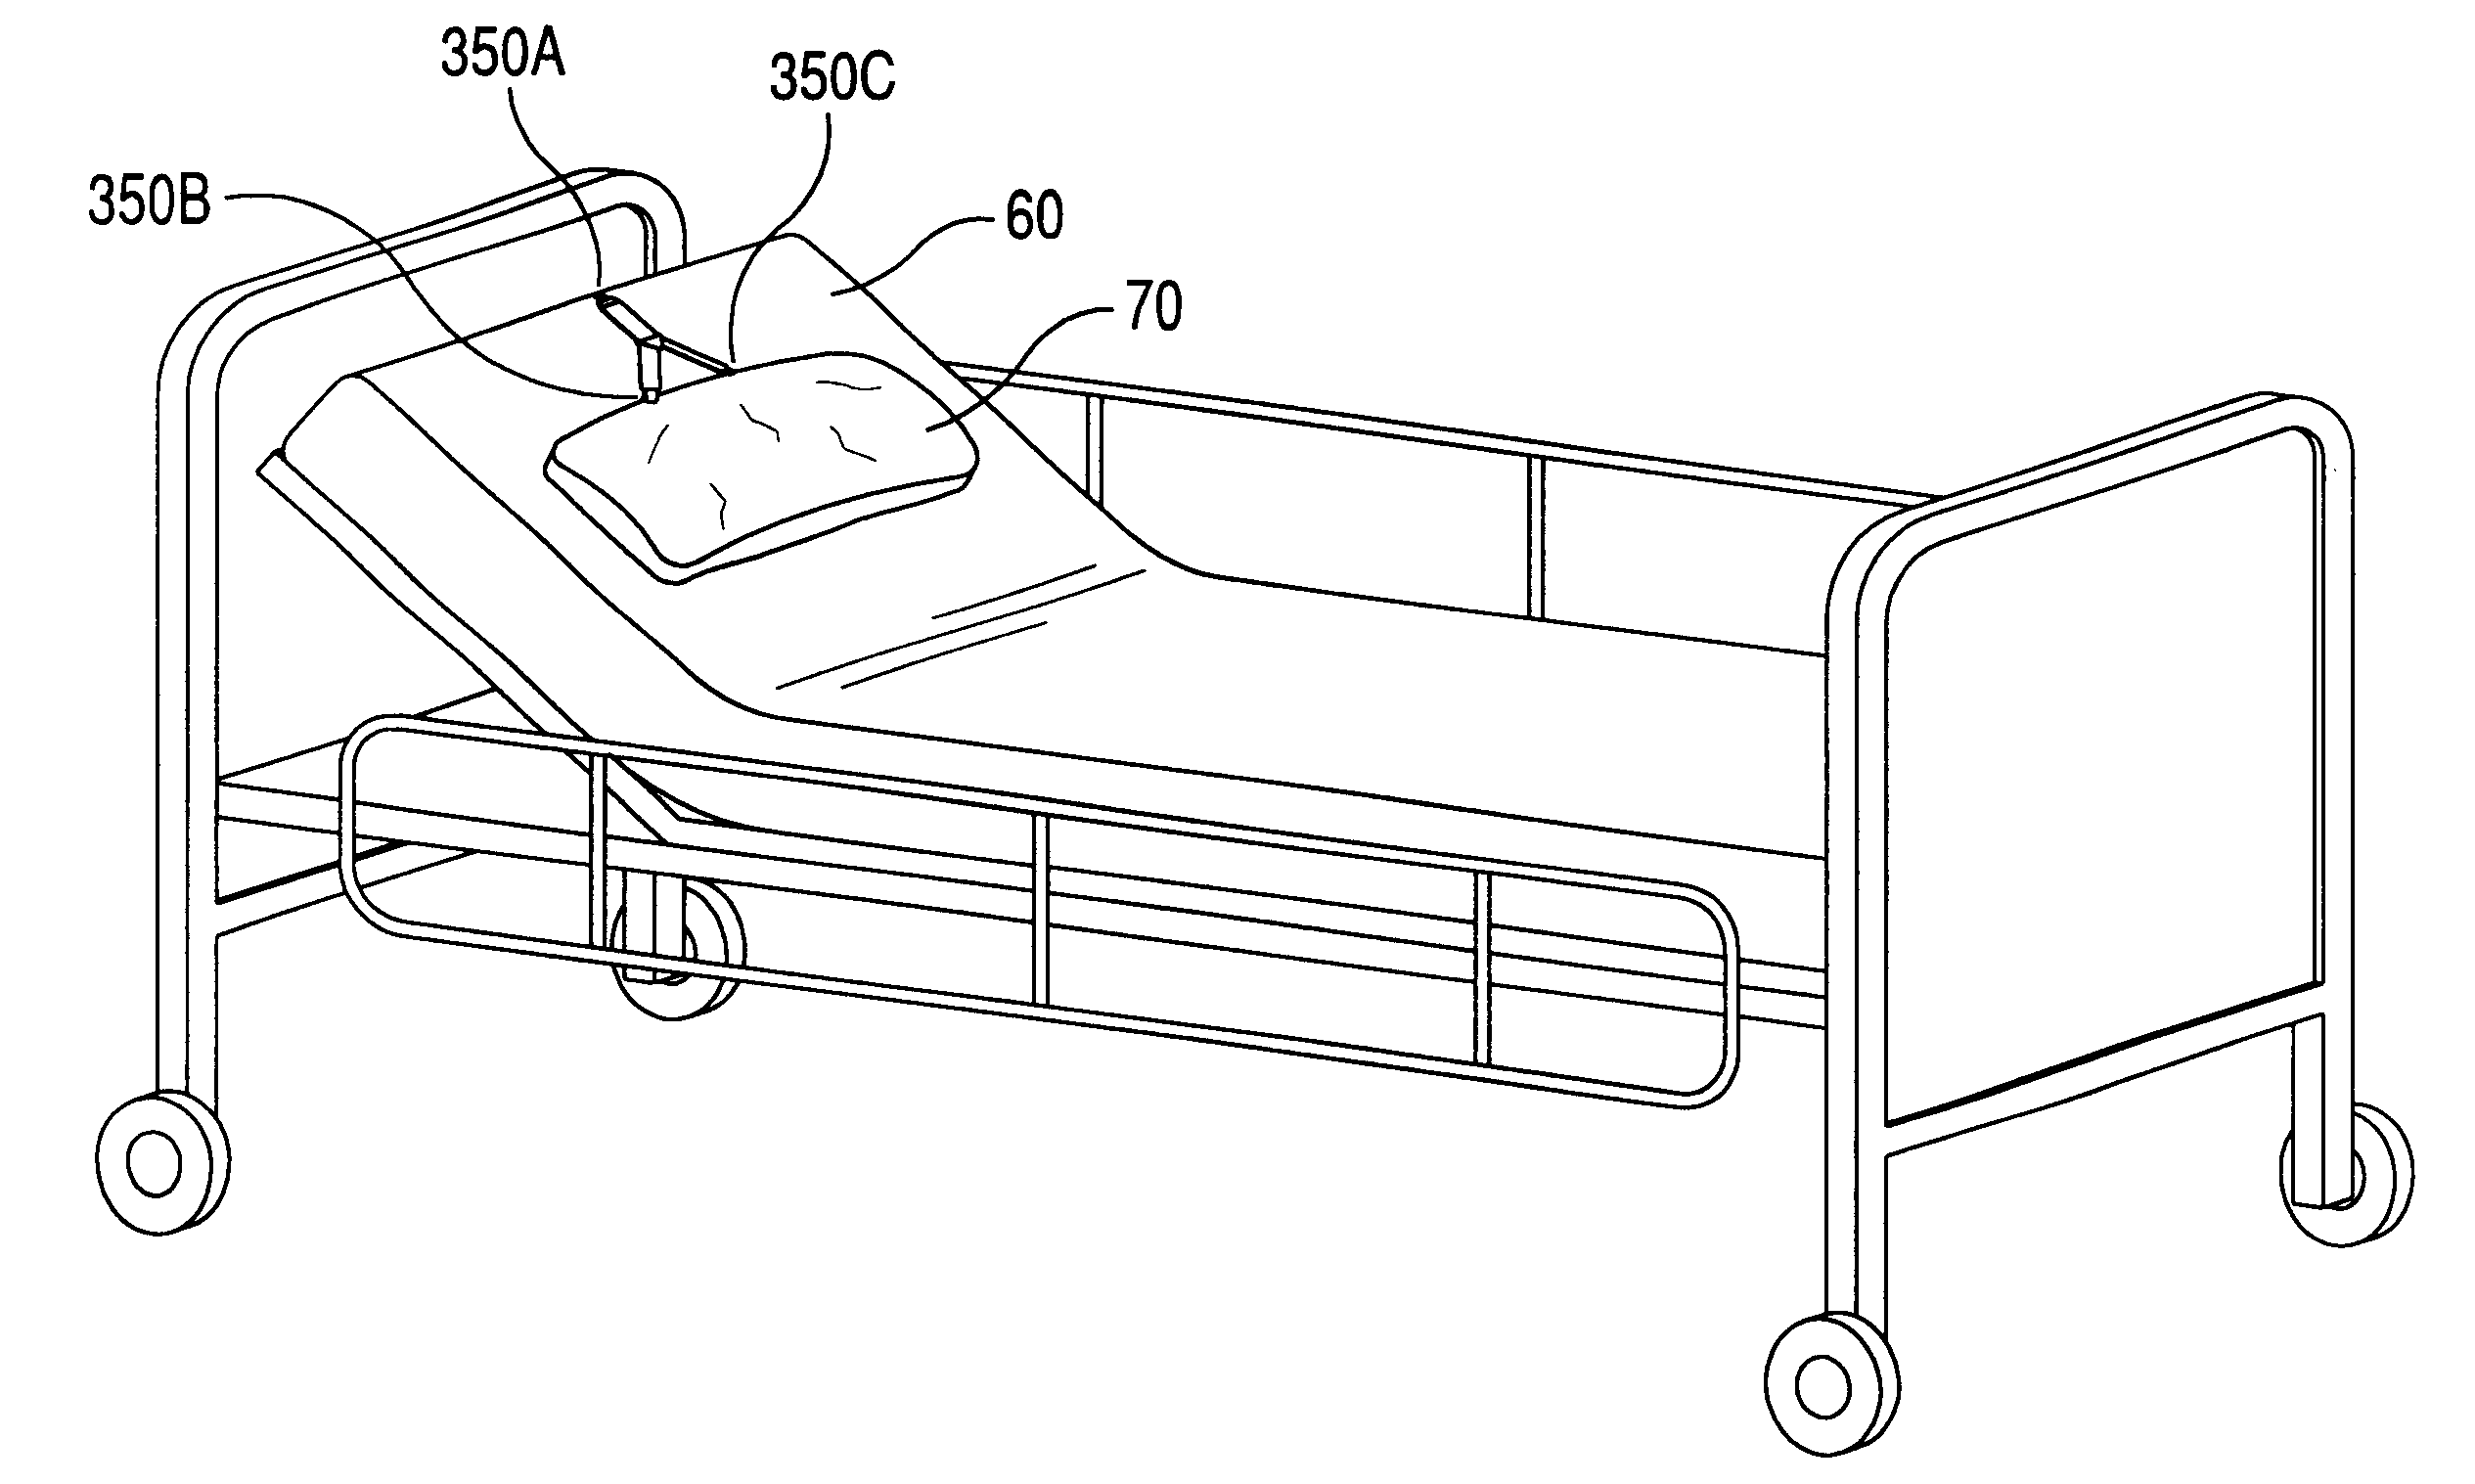 Pillow securing device